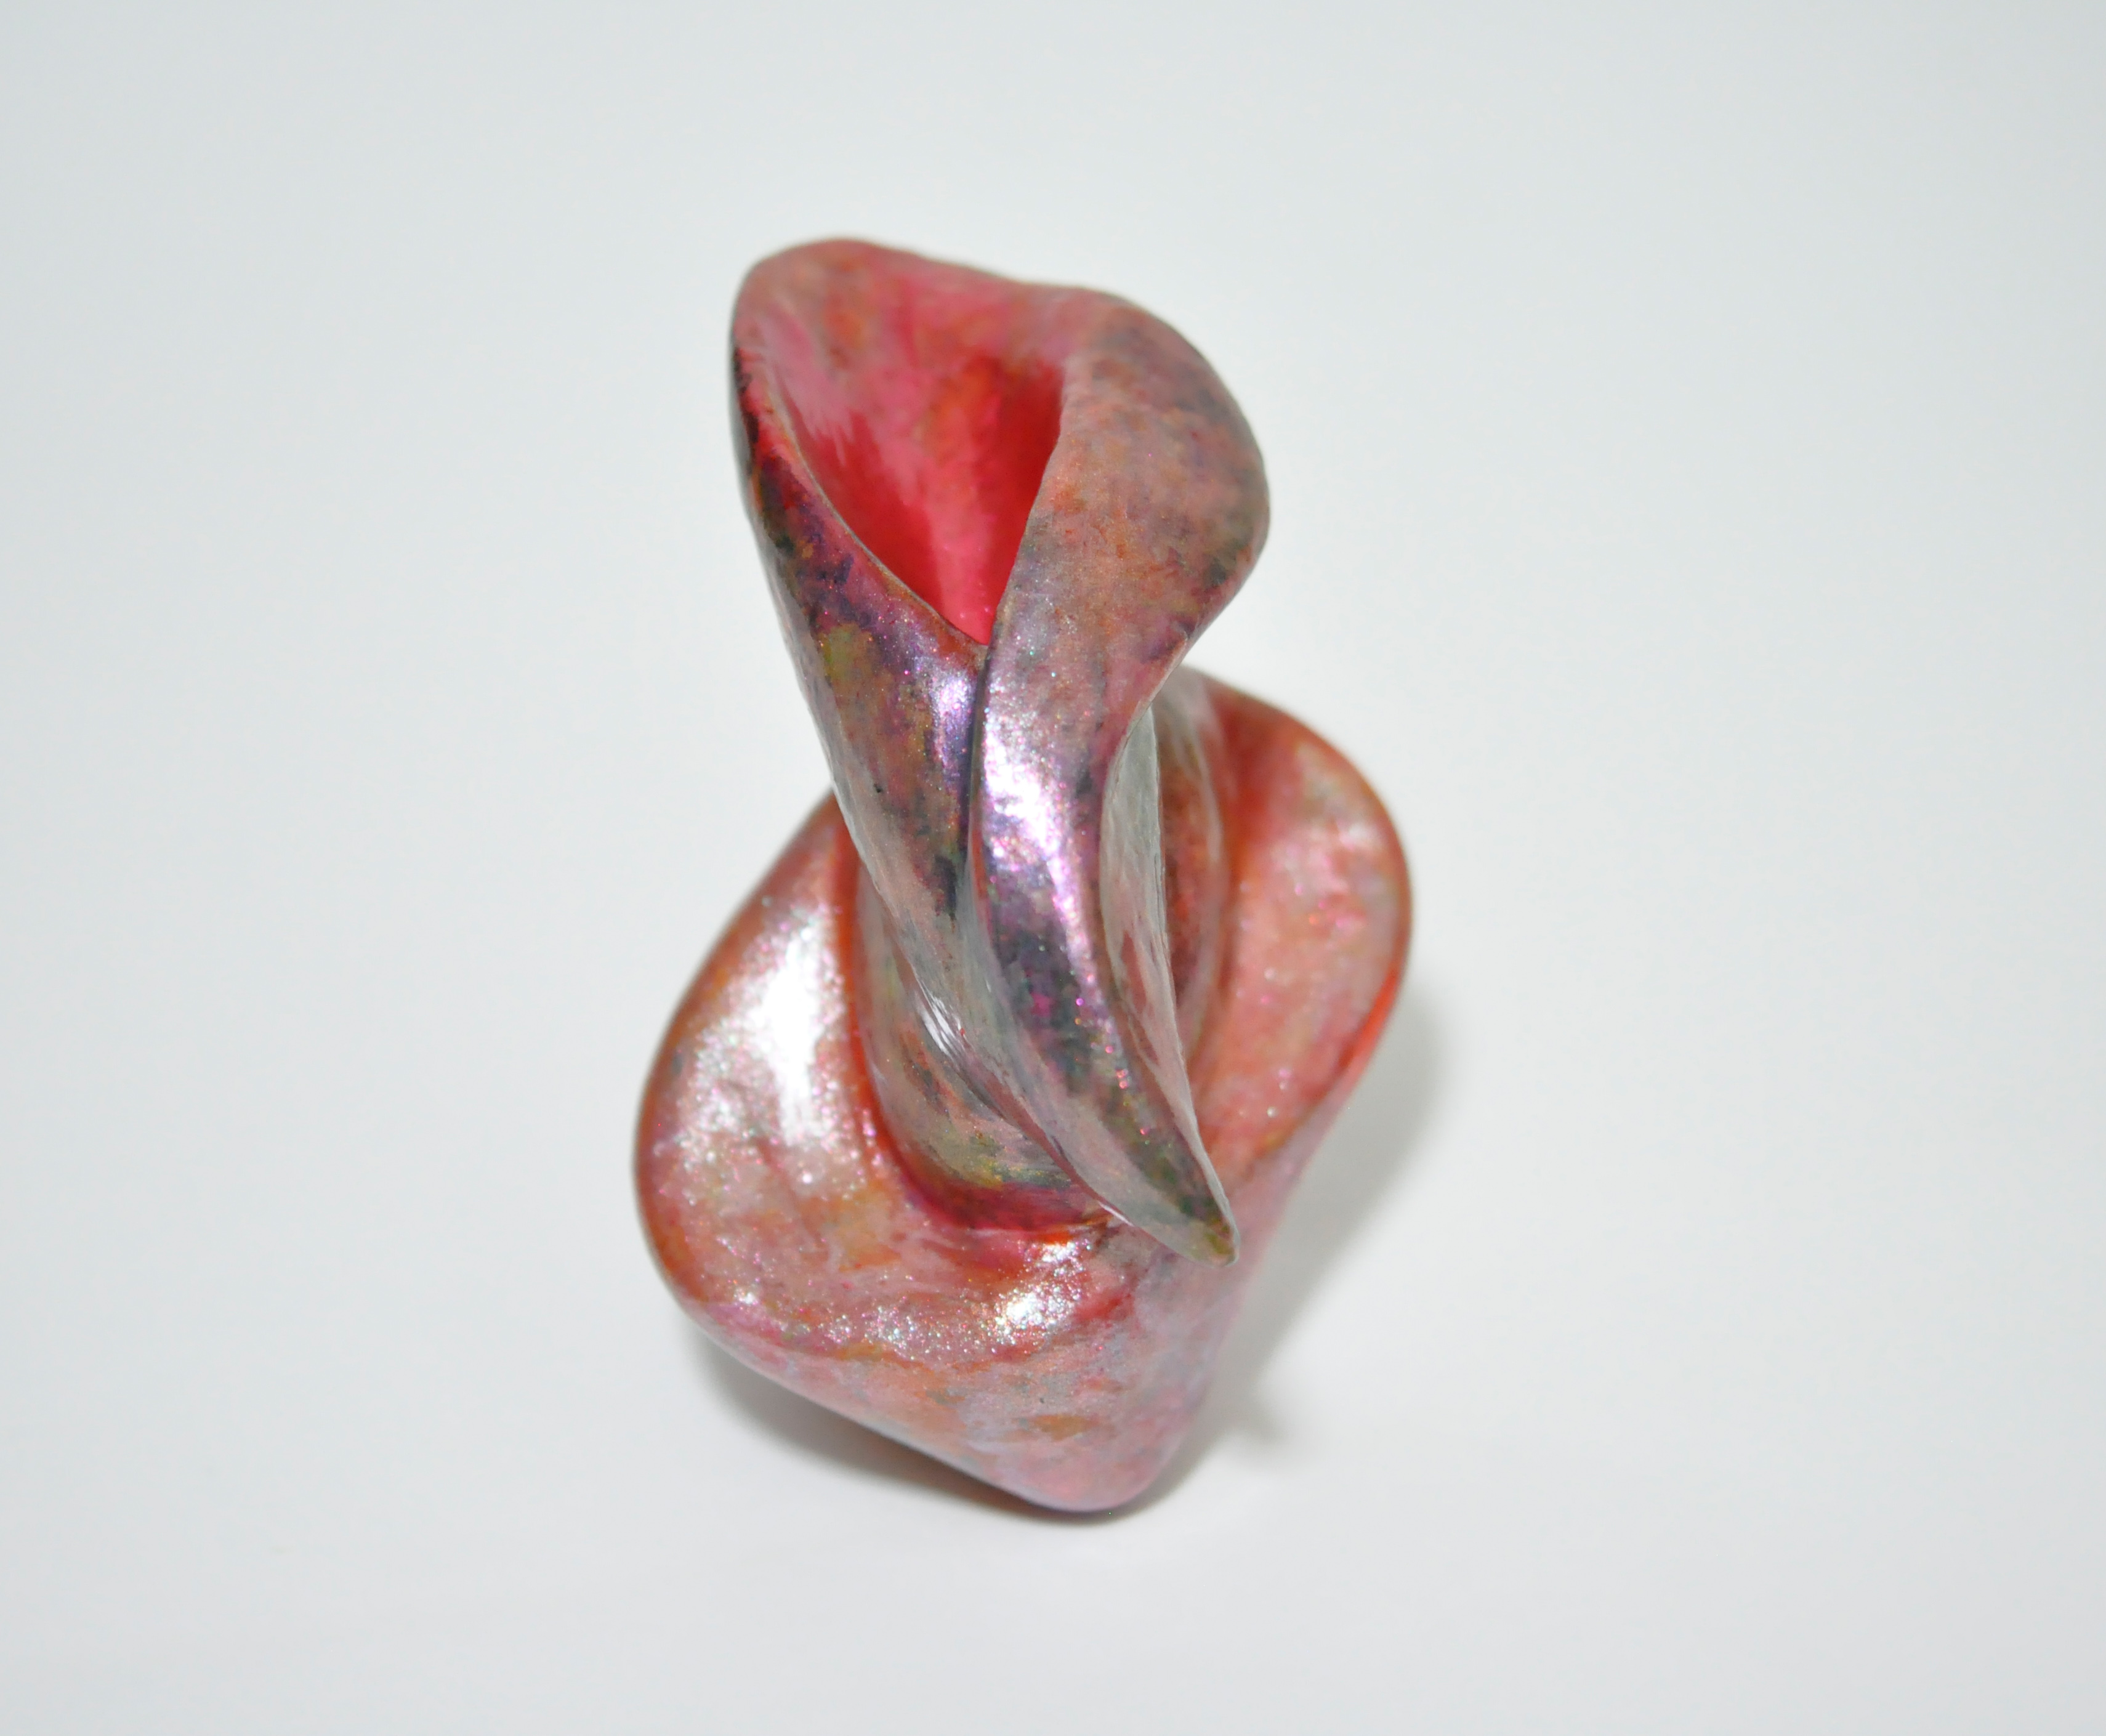 A Touch, 2012, Oil, Nail Polish, and Varnish on Clay, 3.5 x 3.1 x 4.5 in. / 9 x 8 x 11.5 cm [#SS12SC027]